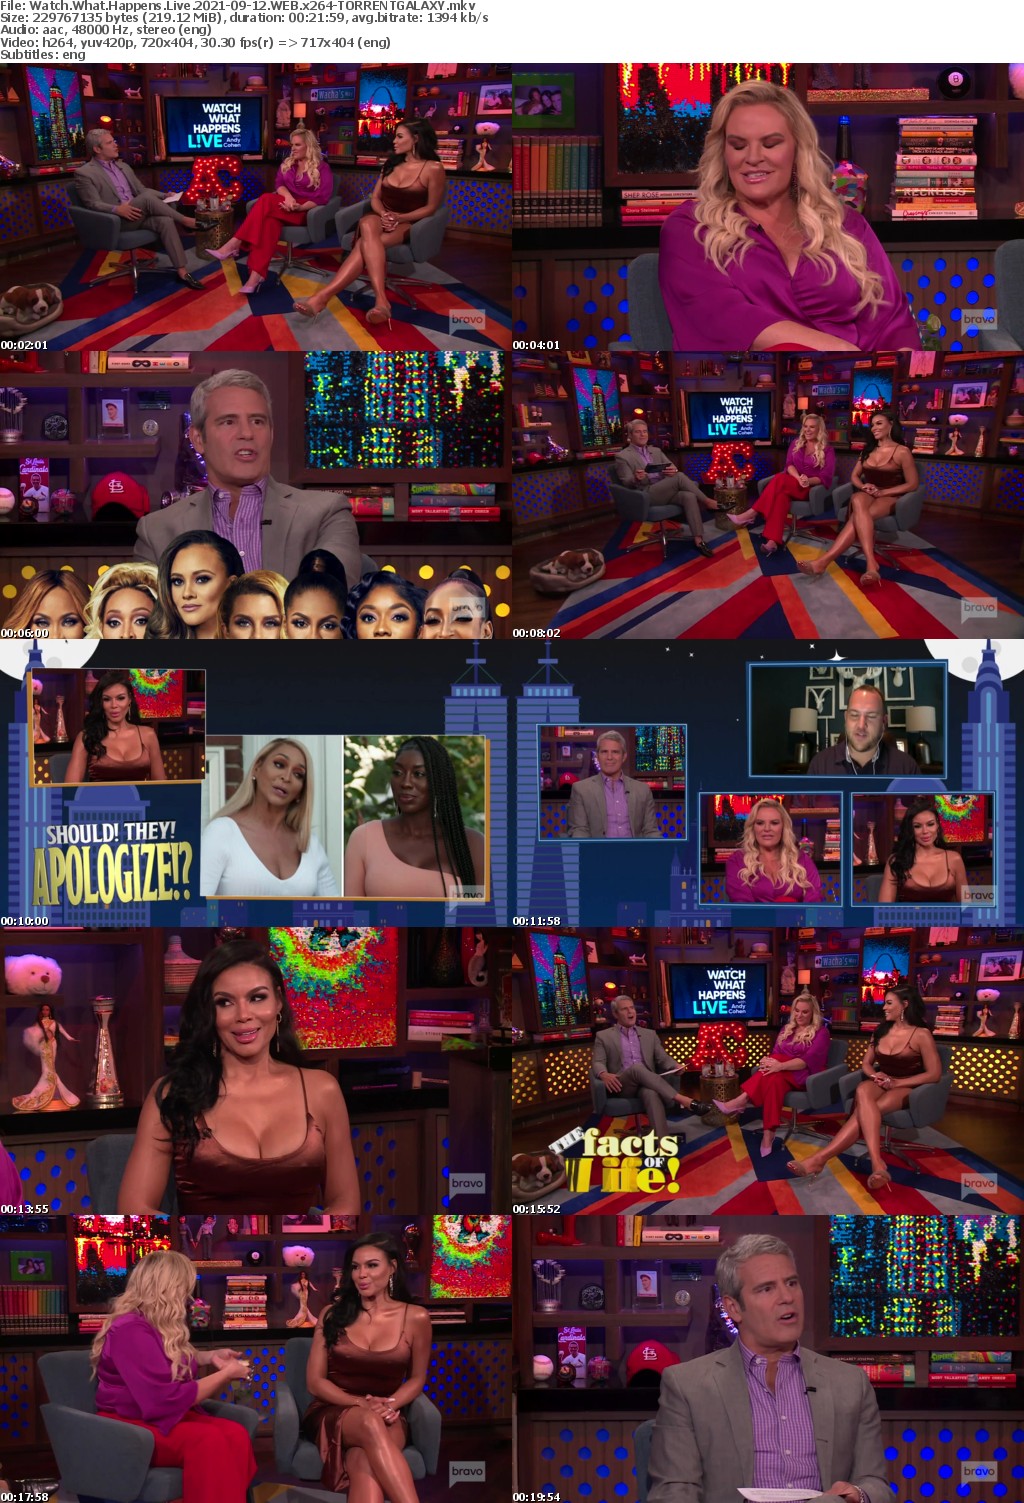 Watch What Happens Live 2021-09-12 WEB x264-GALAXY